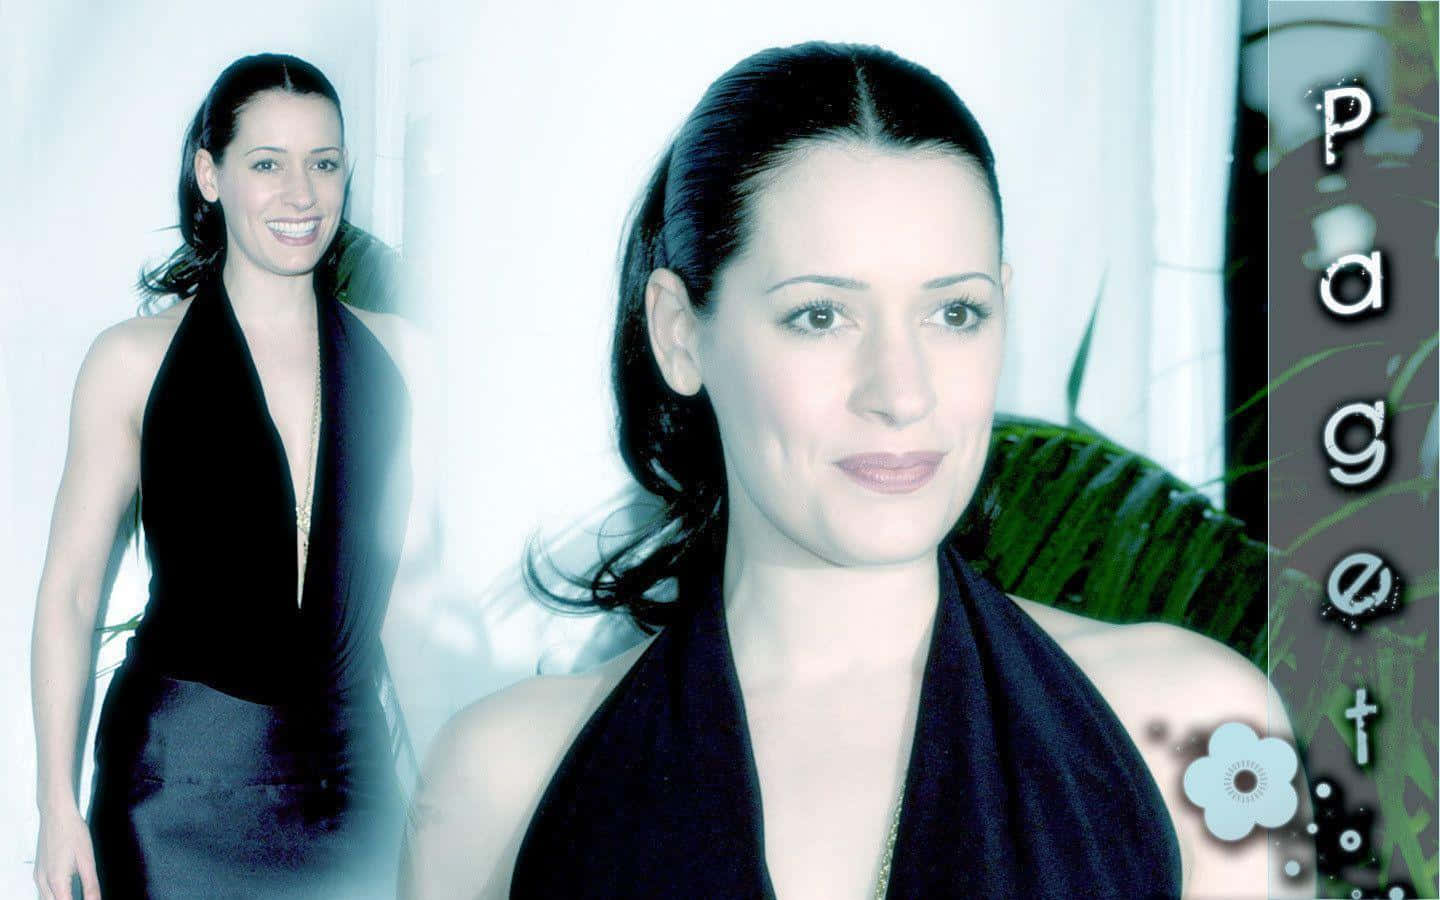 Paget Brewster Striking A Pose In A Stunning Photoshoot